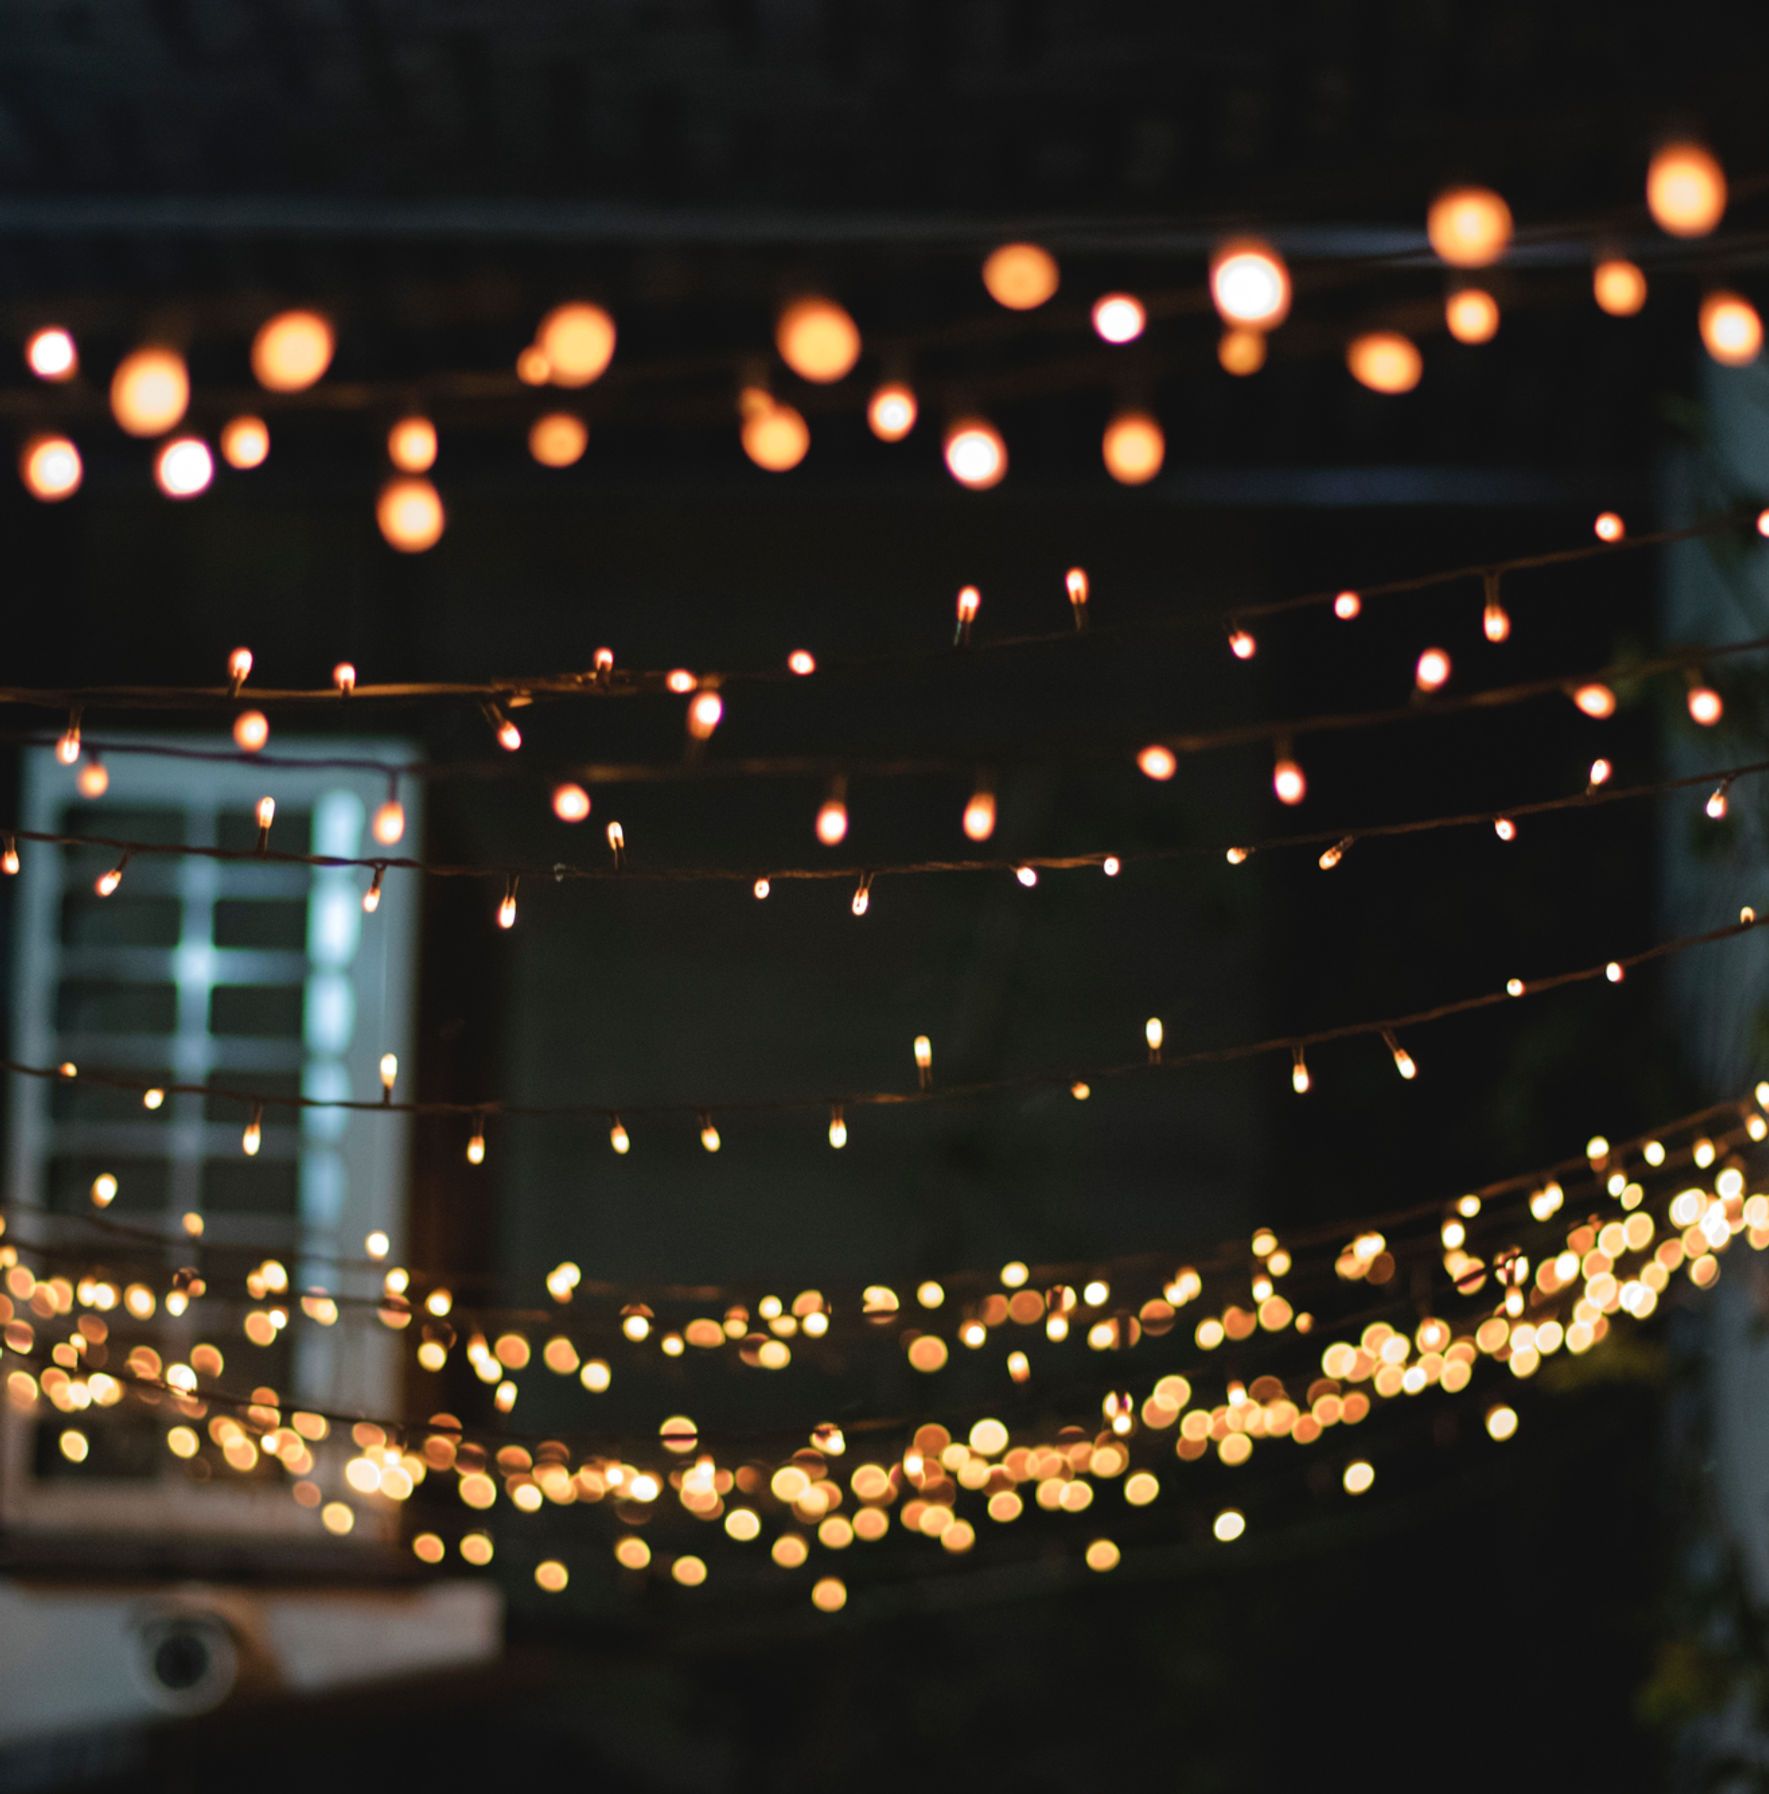 A string of lights hanging from a ceiling. - Fairy lights